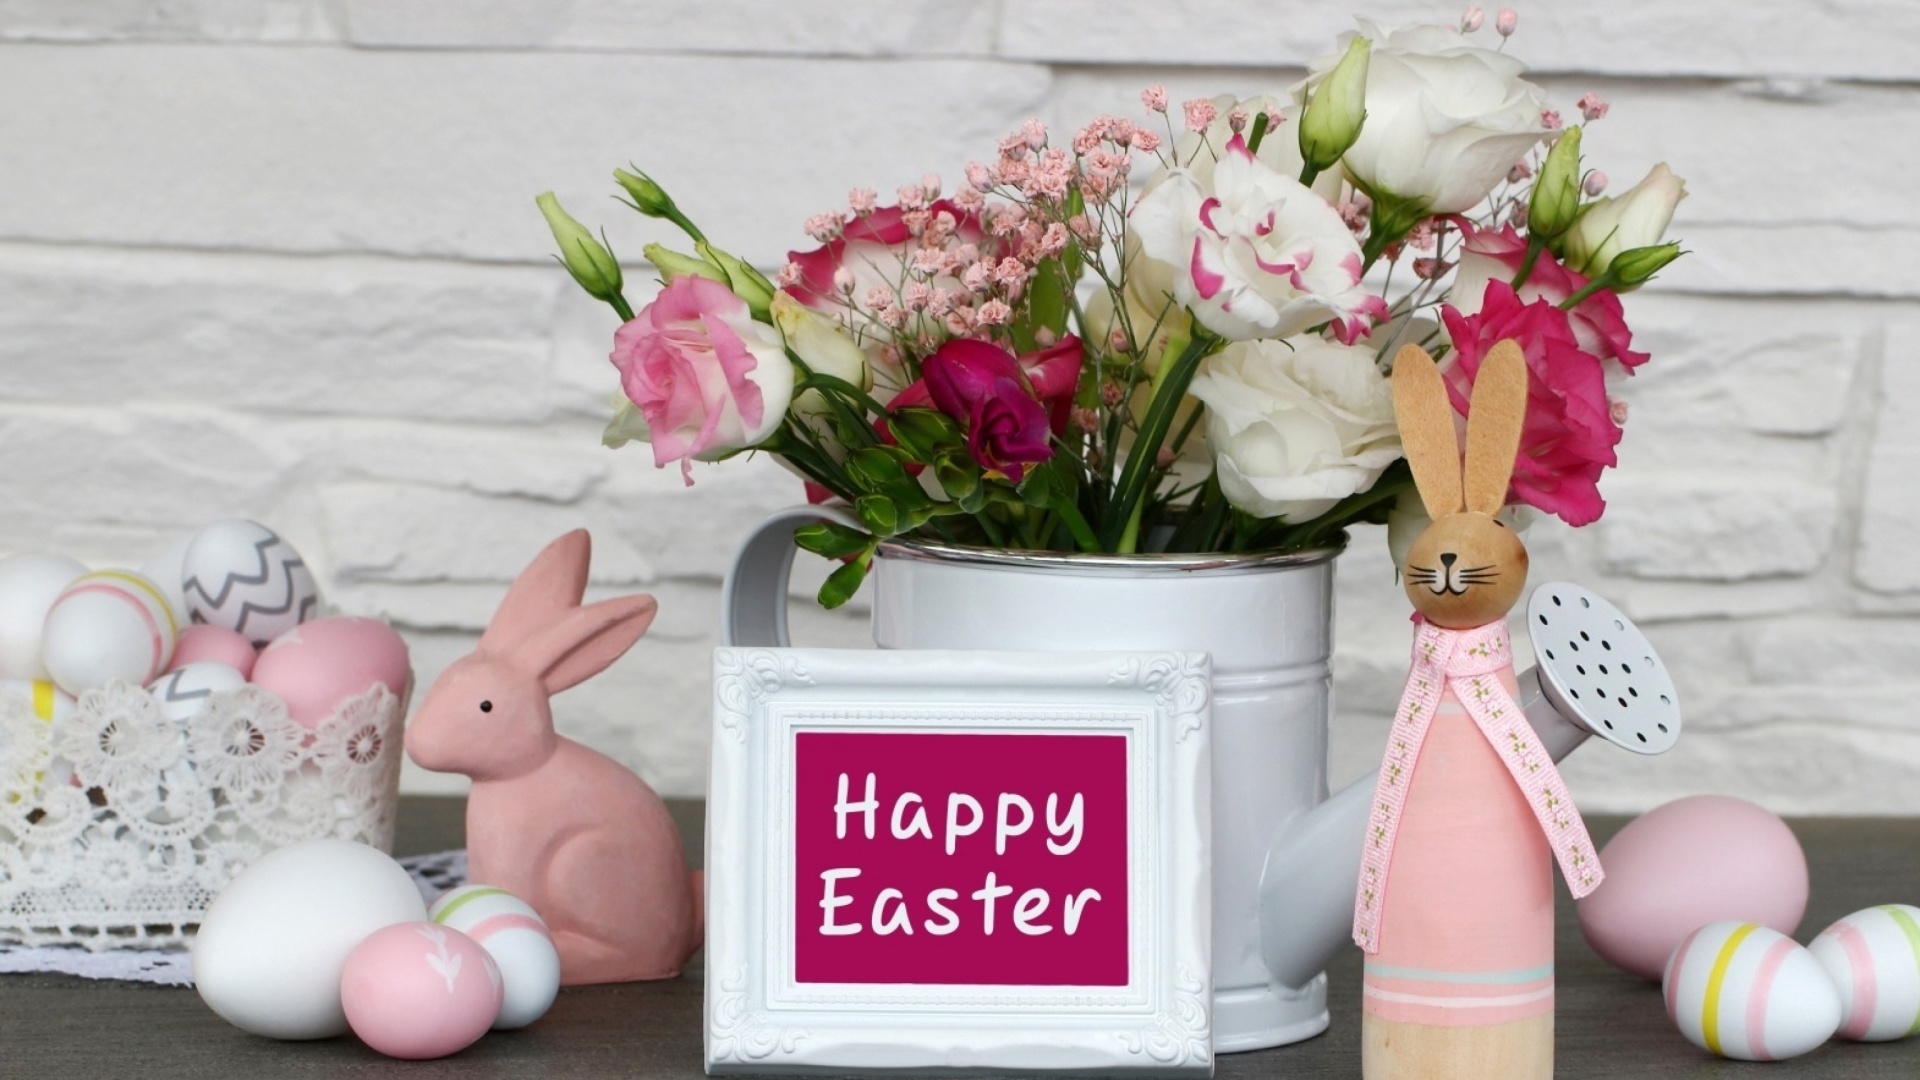 Happy Easter wallpaper for pc